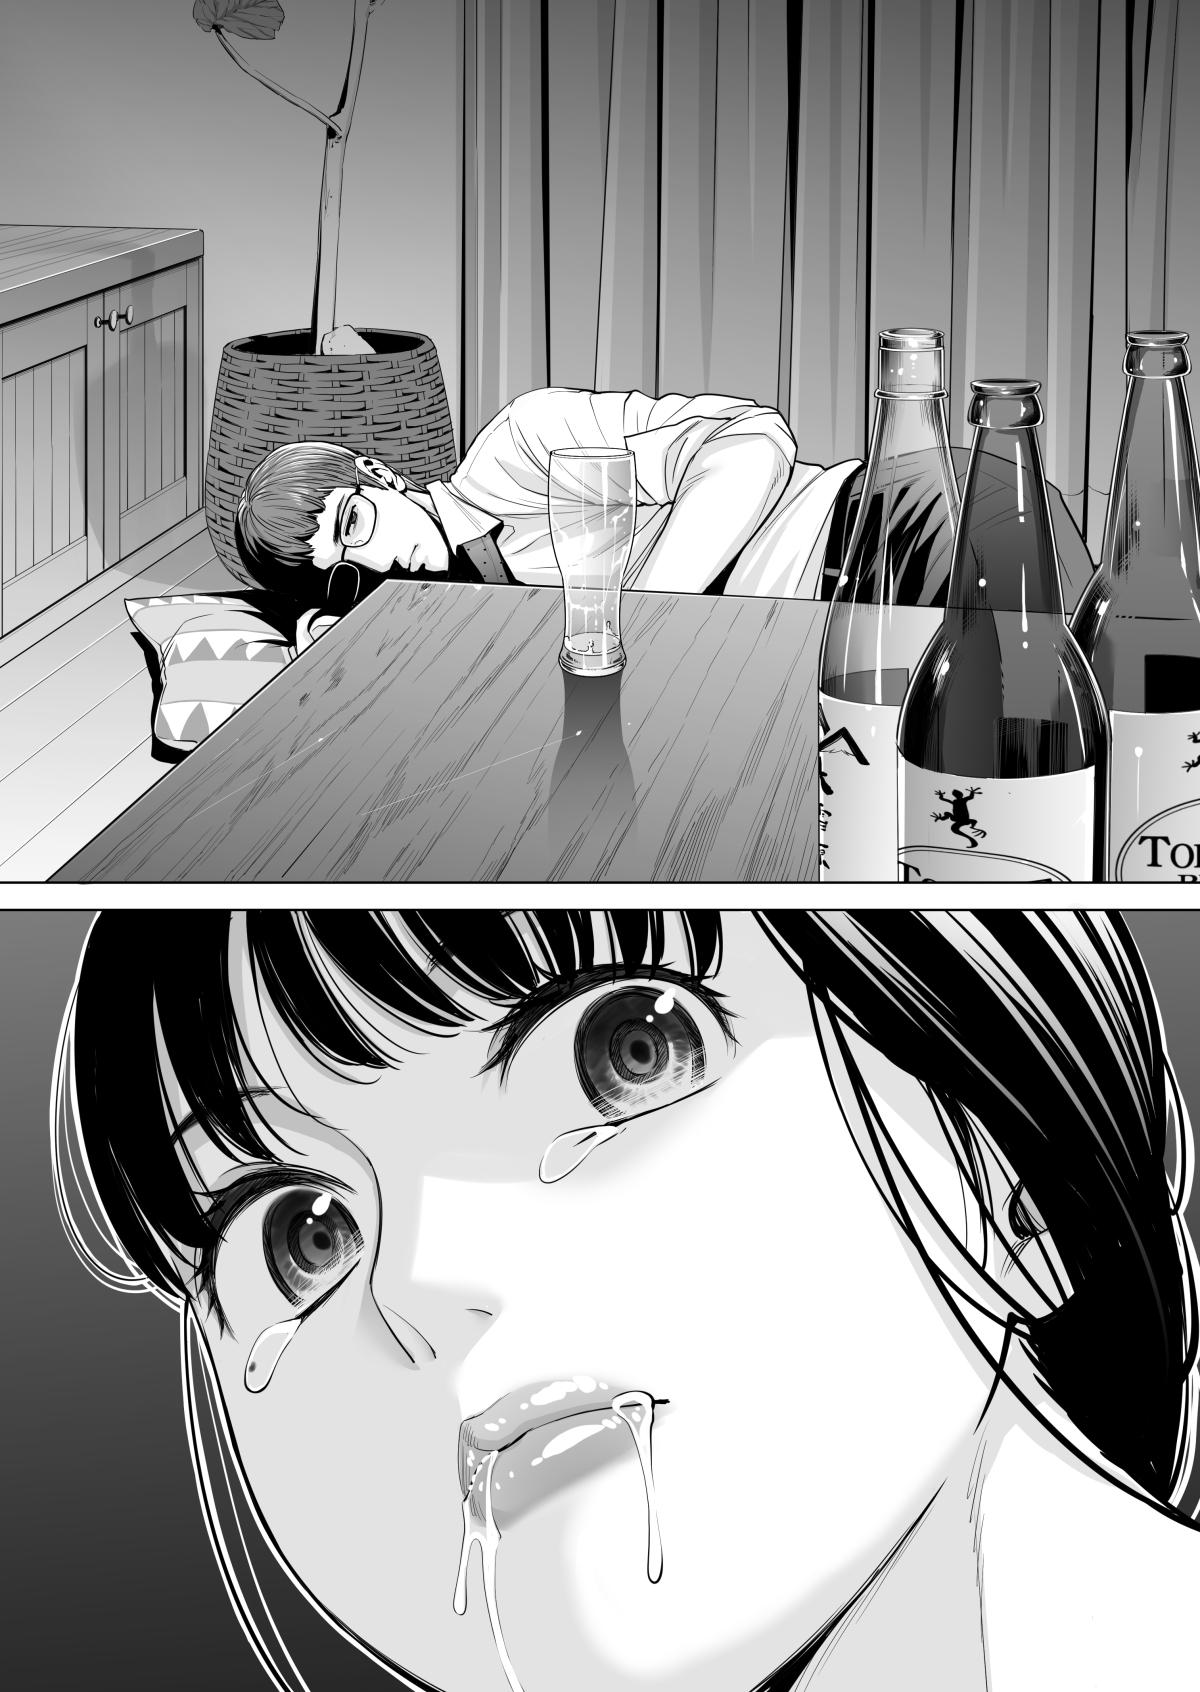 [HGT Lab (Tsusauto)] Tsukiyo no Midare Zake (Zenpen) Moonlit Intoxication ~ A Housewife Stolen by a Coworker Besides her Blackout Drunk Husband ~ Chapter 1 [English] 58